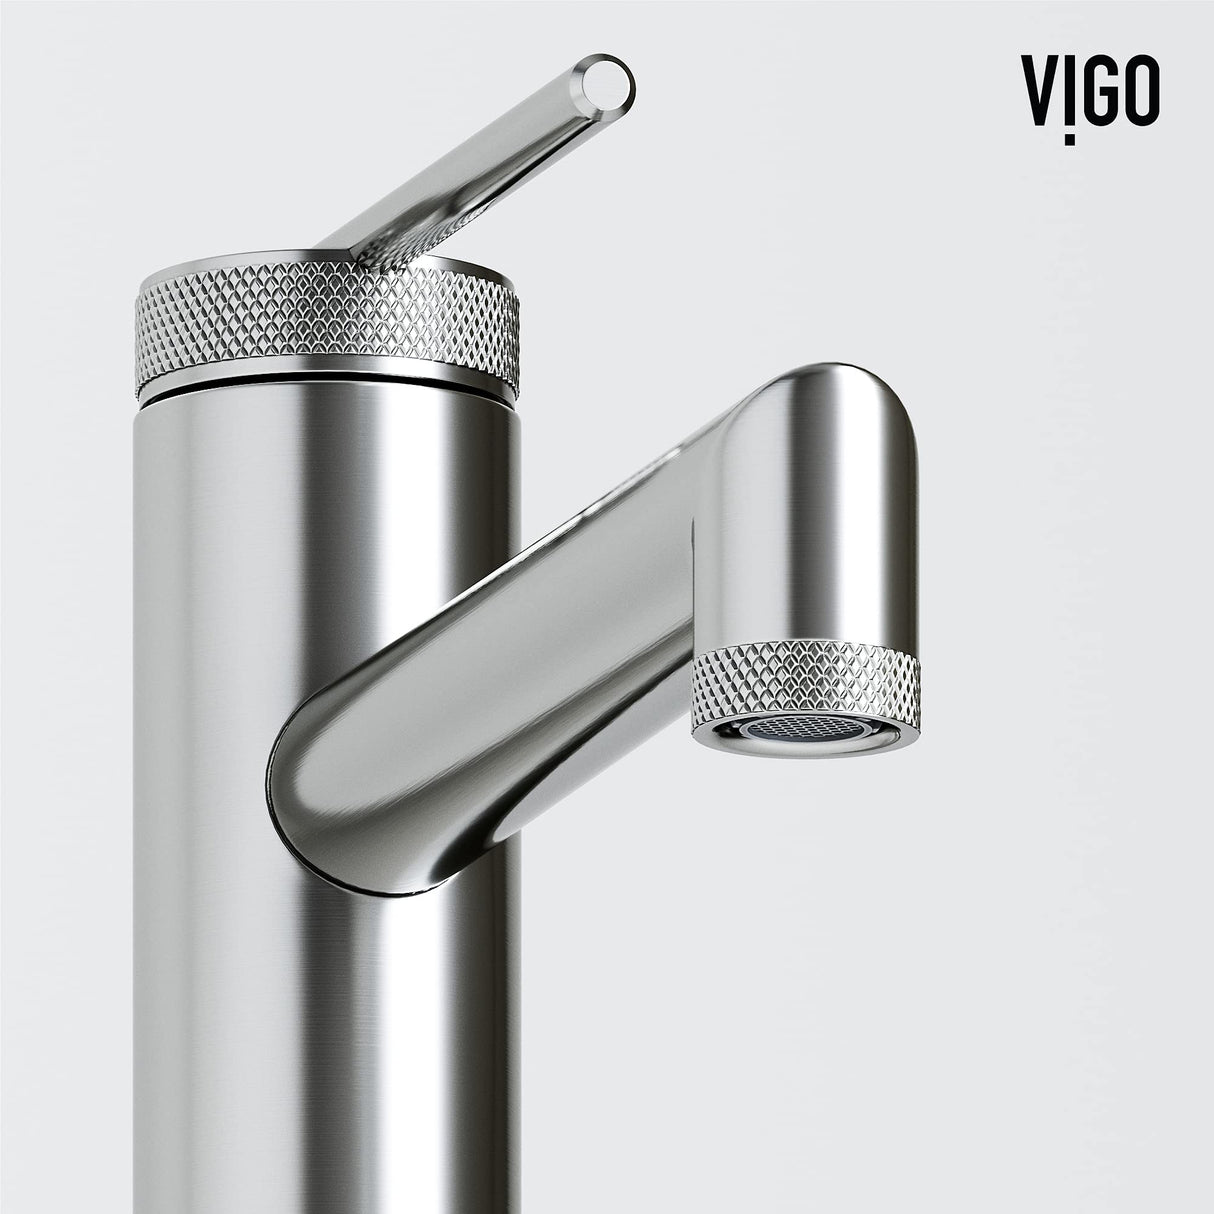 VIGO VGT2055 13.75" L -18.0" W -4.63" H Matte Stone Vinca Composite Rectangular Vessel Bathroom Sink in White with Faucet and Pop-Up Drain in Brushed Nickel